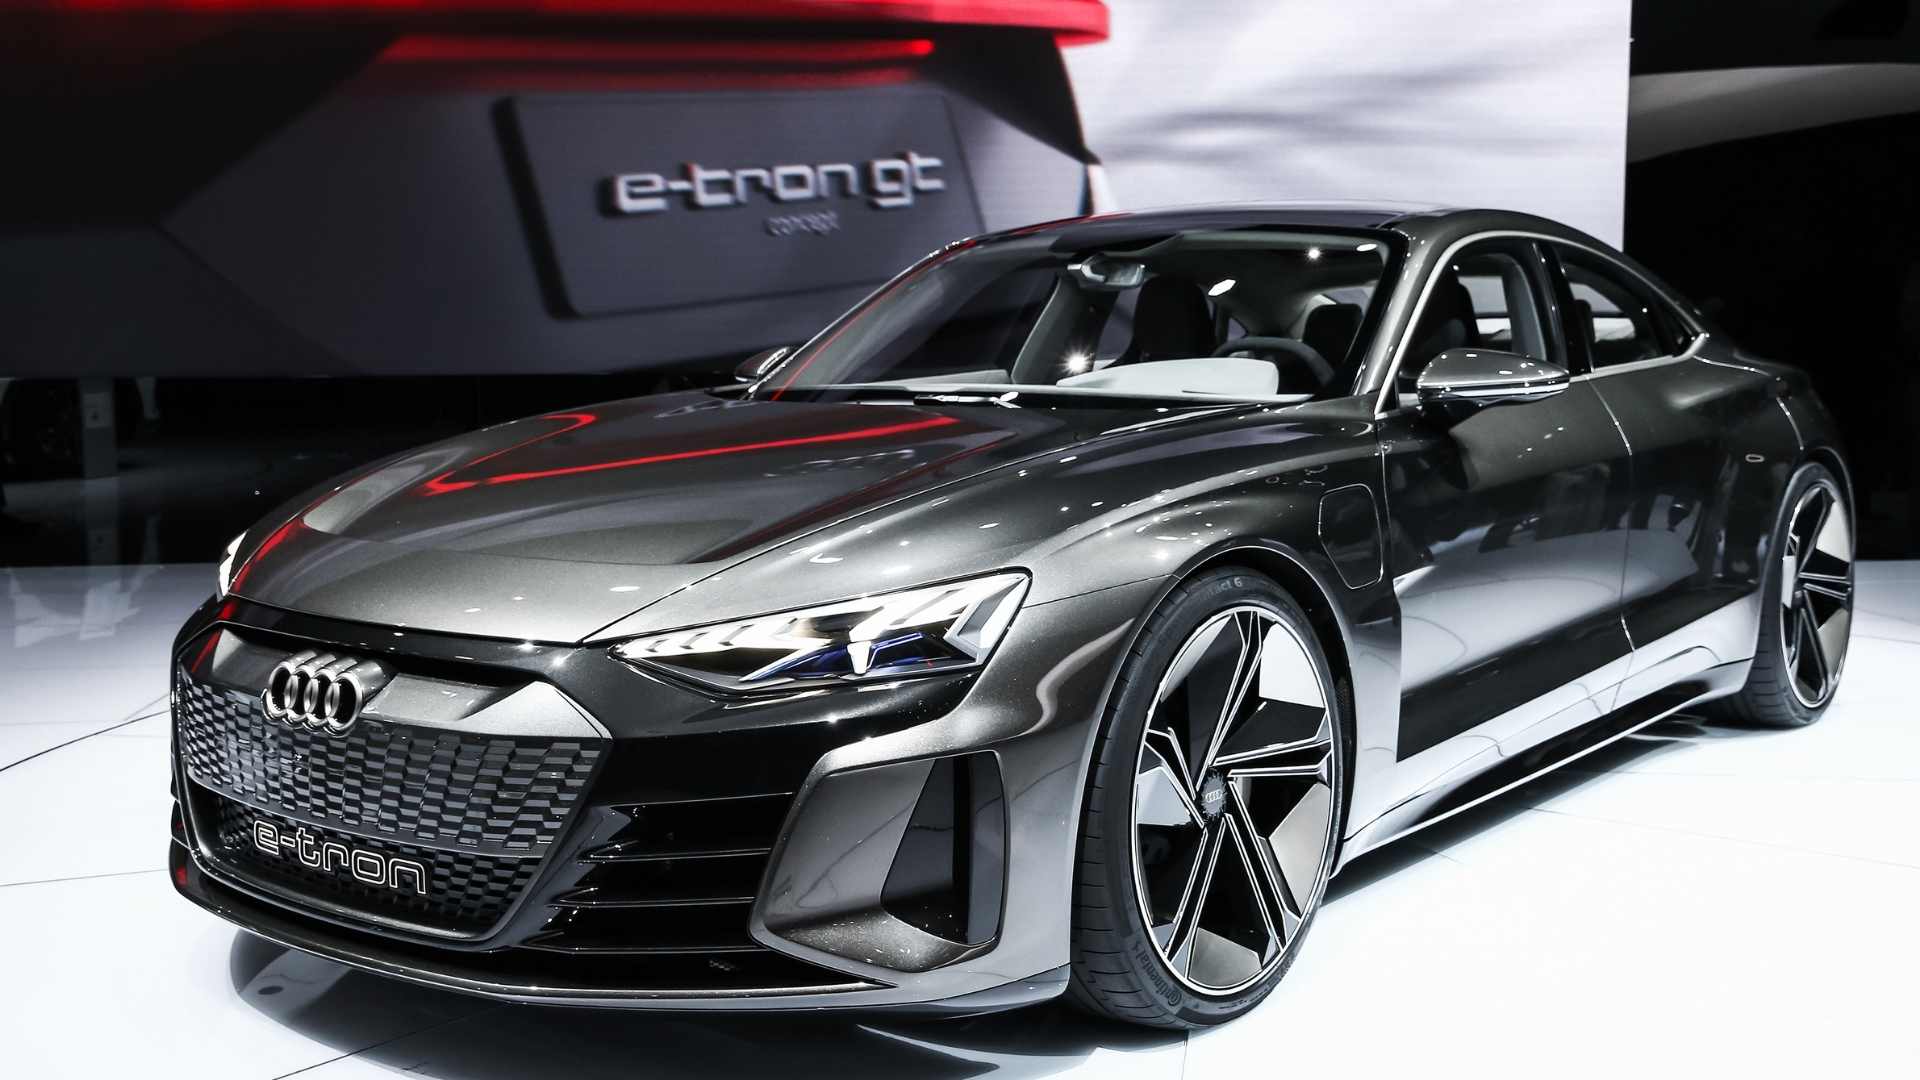 Driving the Audi e-tron GT Benefits the Environment